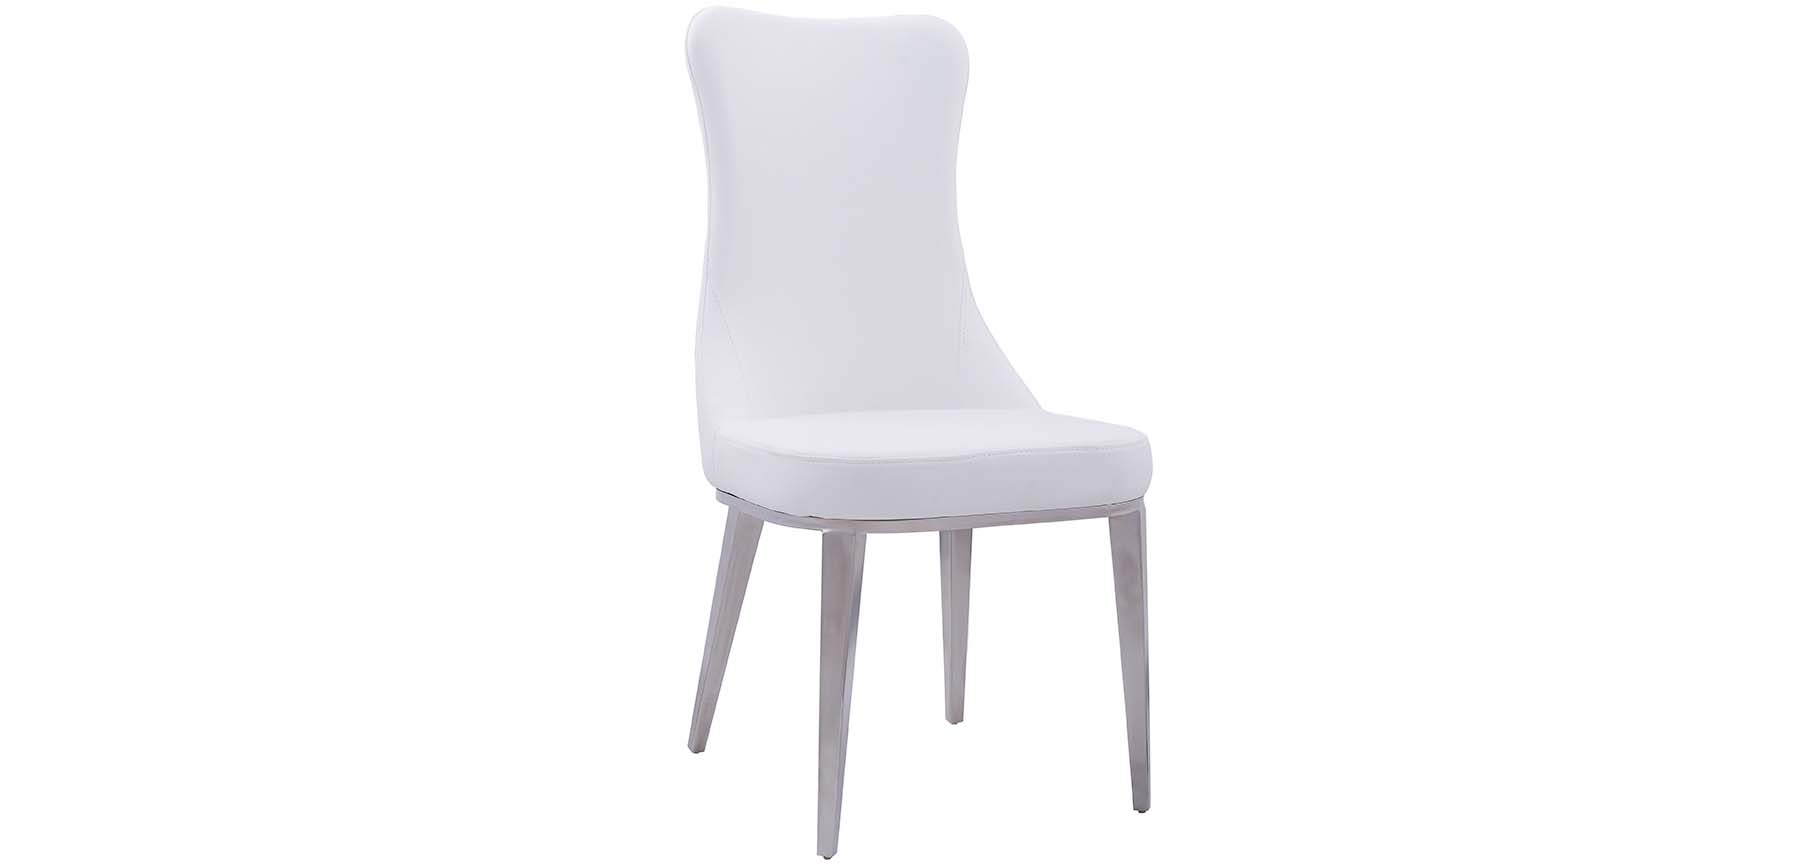 Brands Garcia Sabate REPLAY 6138 Solid White (no pattern) Chair